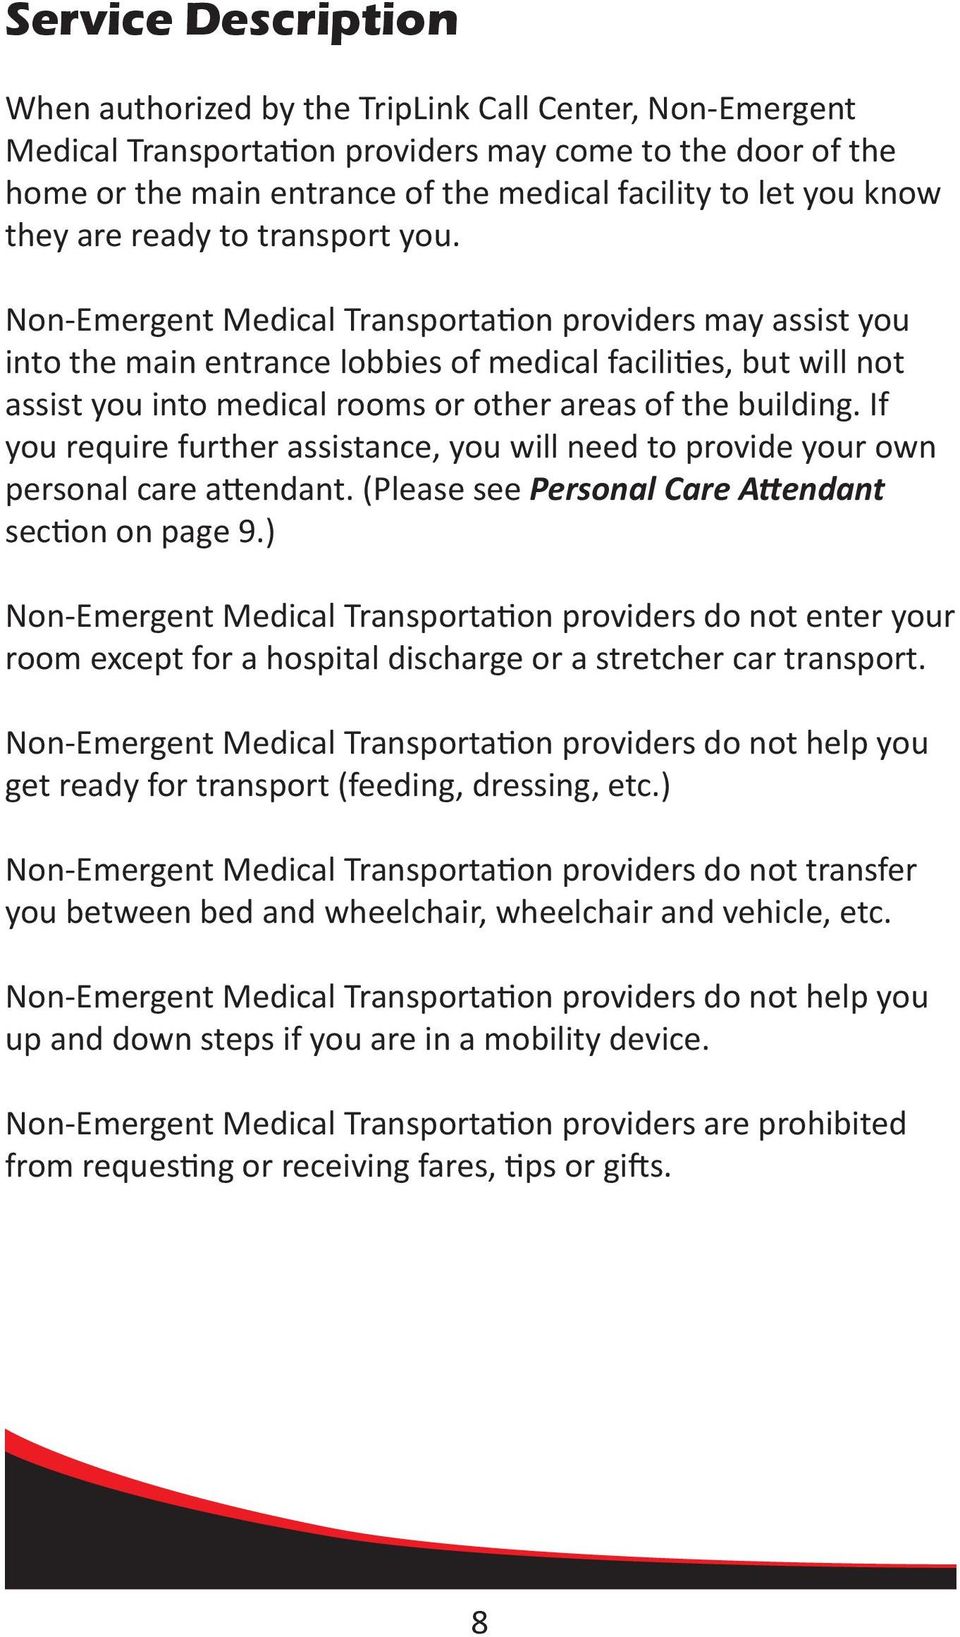 Non-Emergent Medical Transportation providers may assist you into the main entrance lobbies of medical facilities, but will not assist you into medical rooms or other areas of the building.